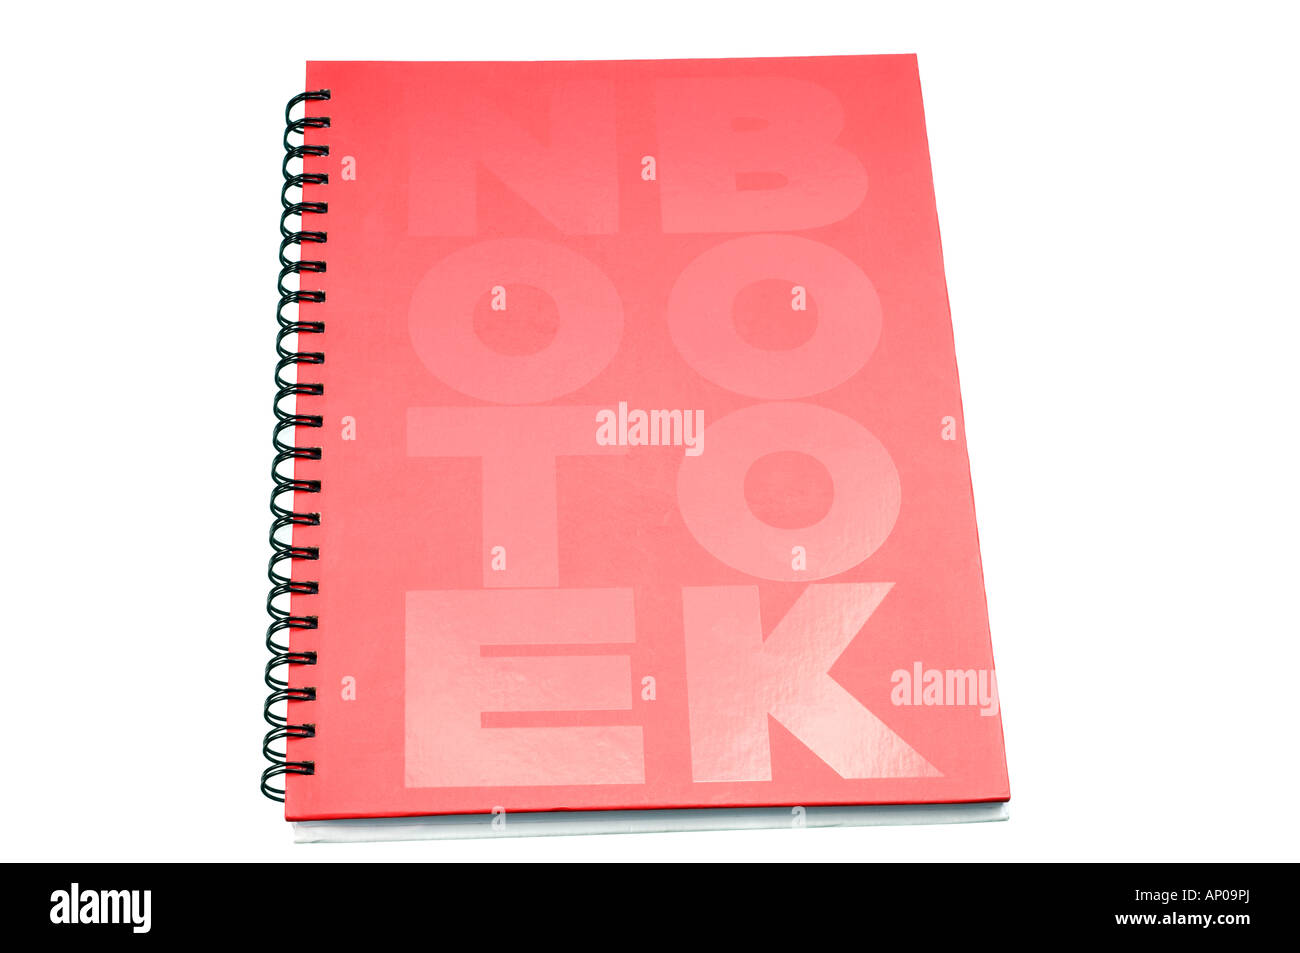 Large red note book Stock Photo